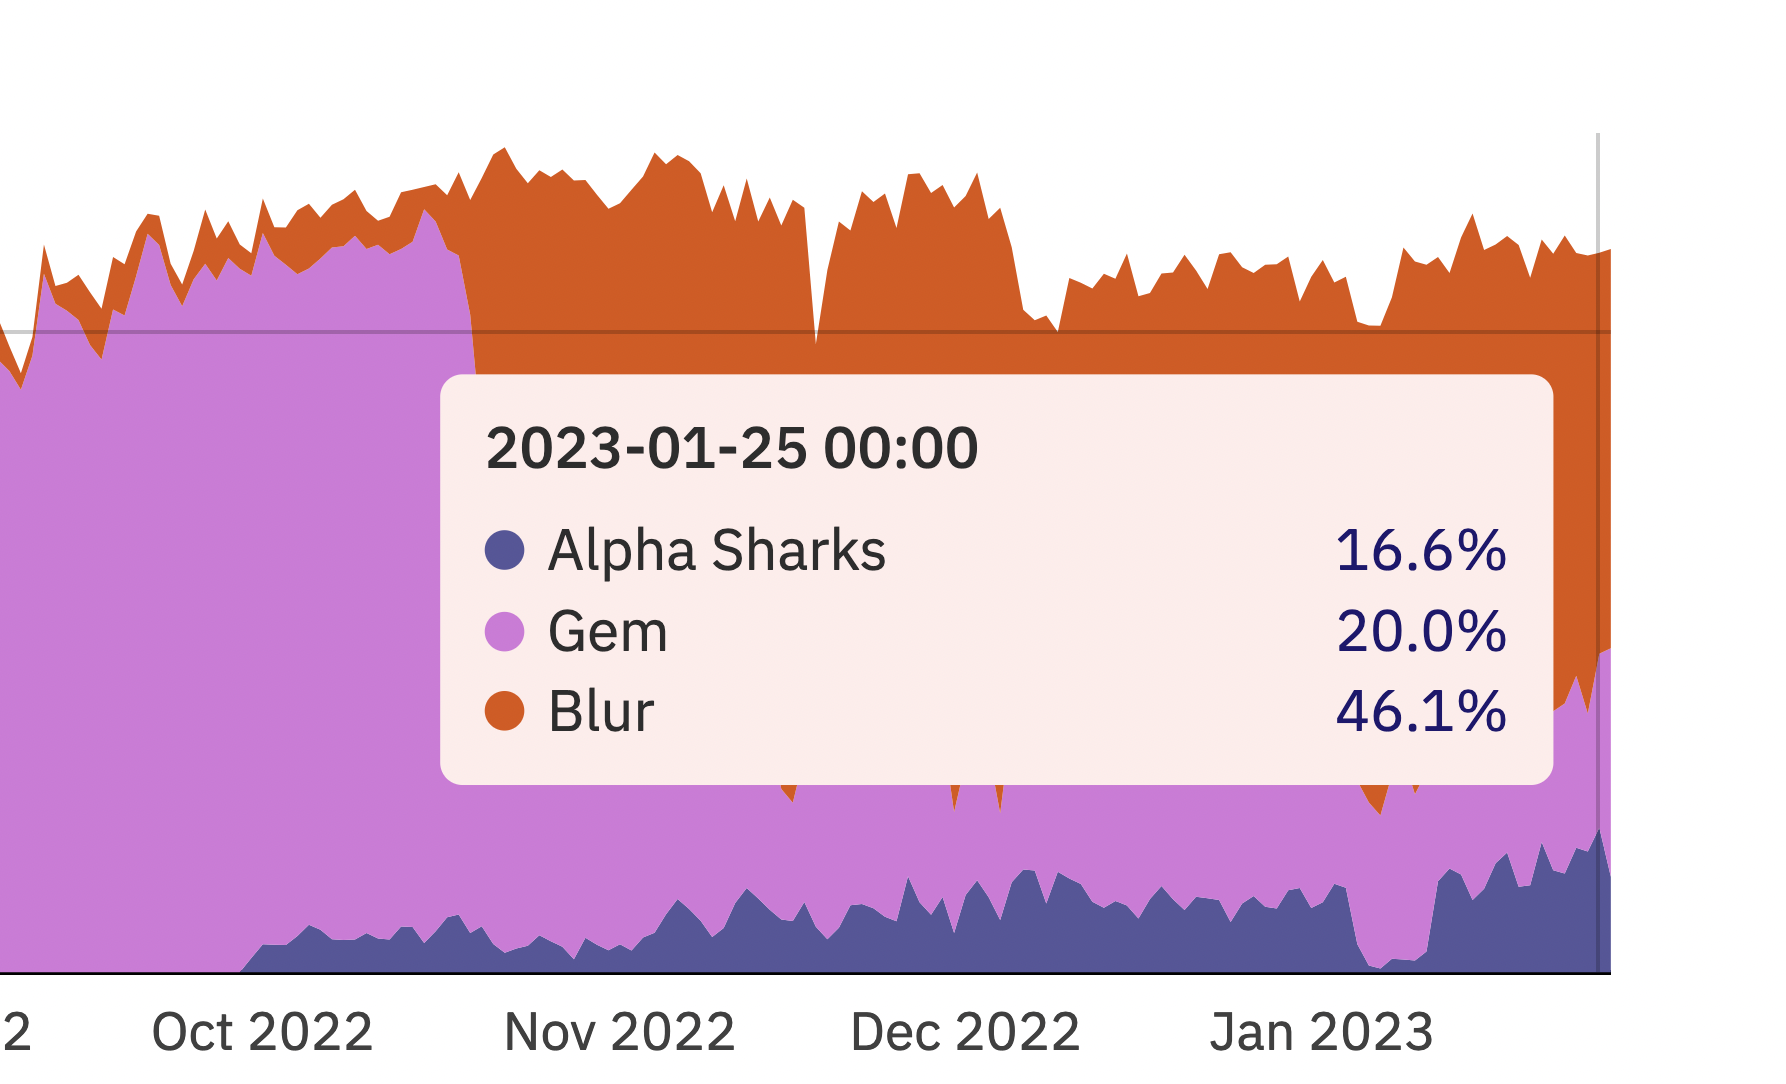 NFT Aggregators Shares by Number of Txns (AlphaSharks = Magically)